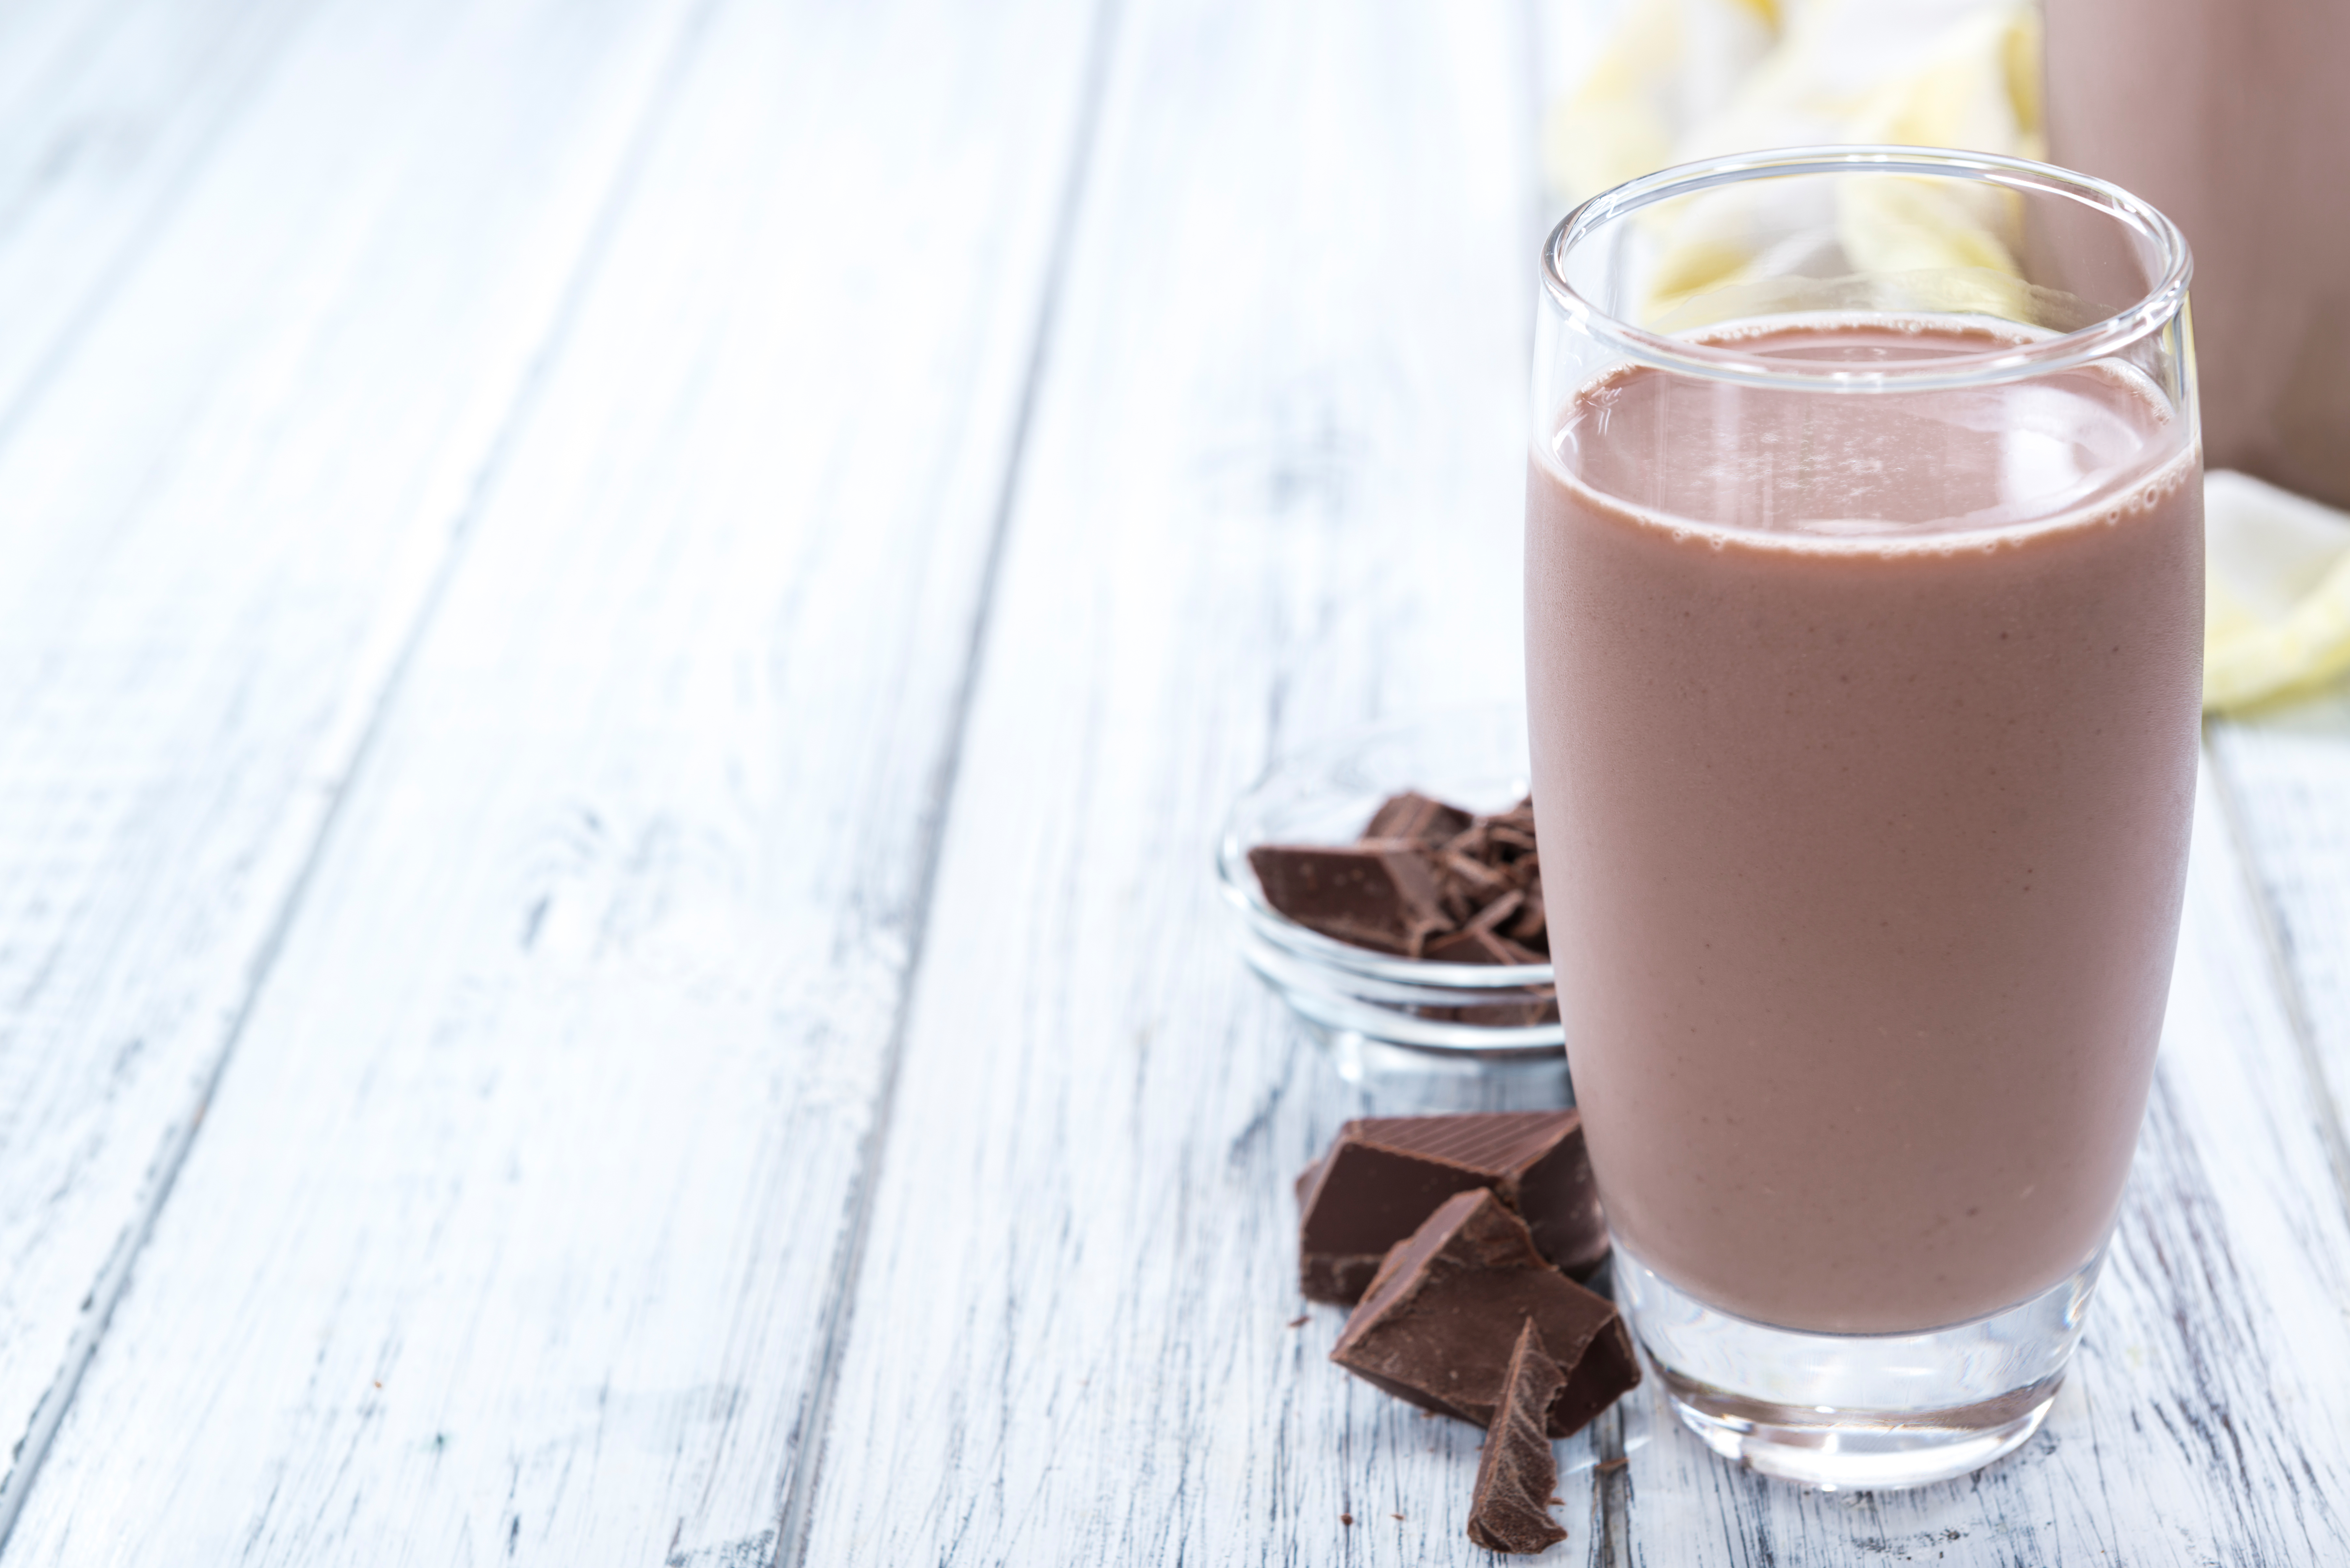 Keto Shakes Can Help You Shed 9 Pounds a Week